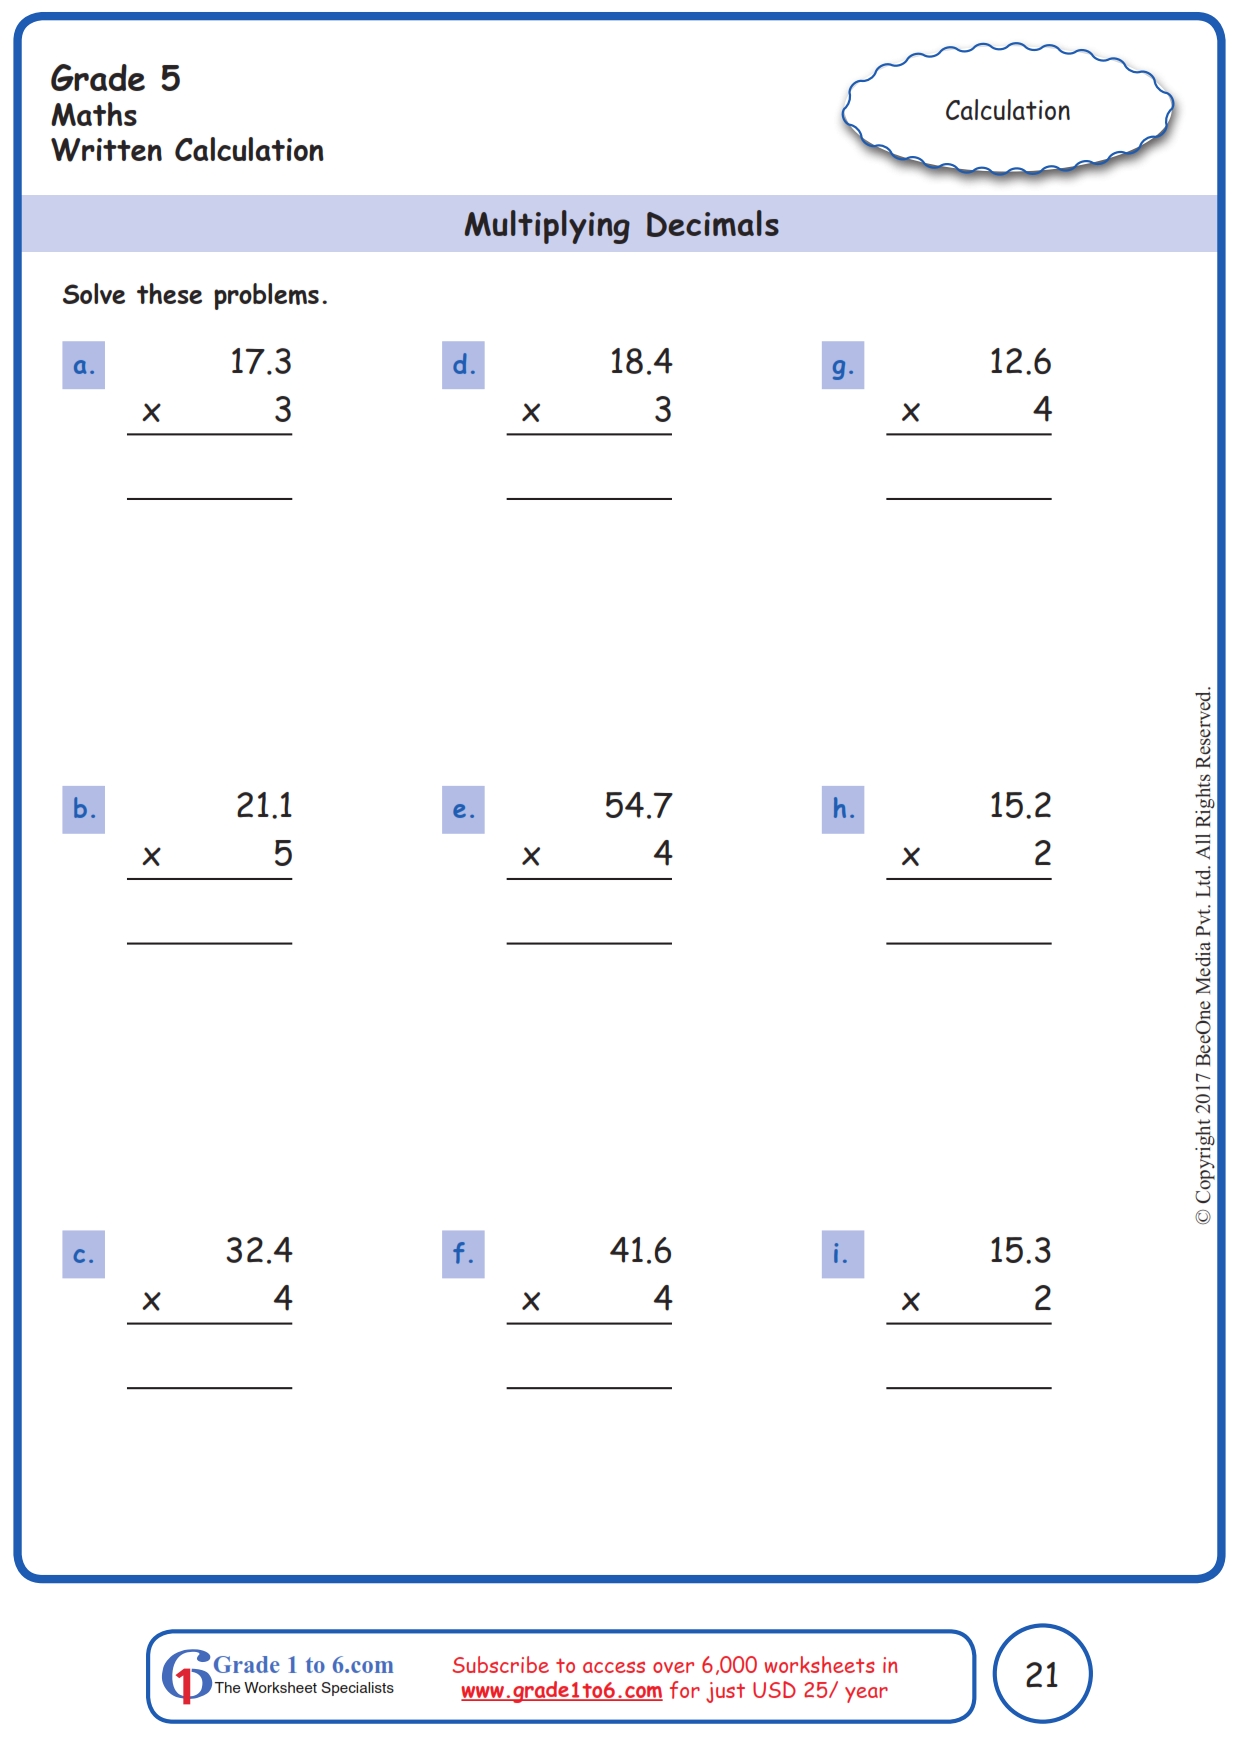 multiplication-decimals-worksheets-grade-5-practice-percentages-by-finding-the-discount-prices